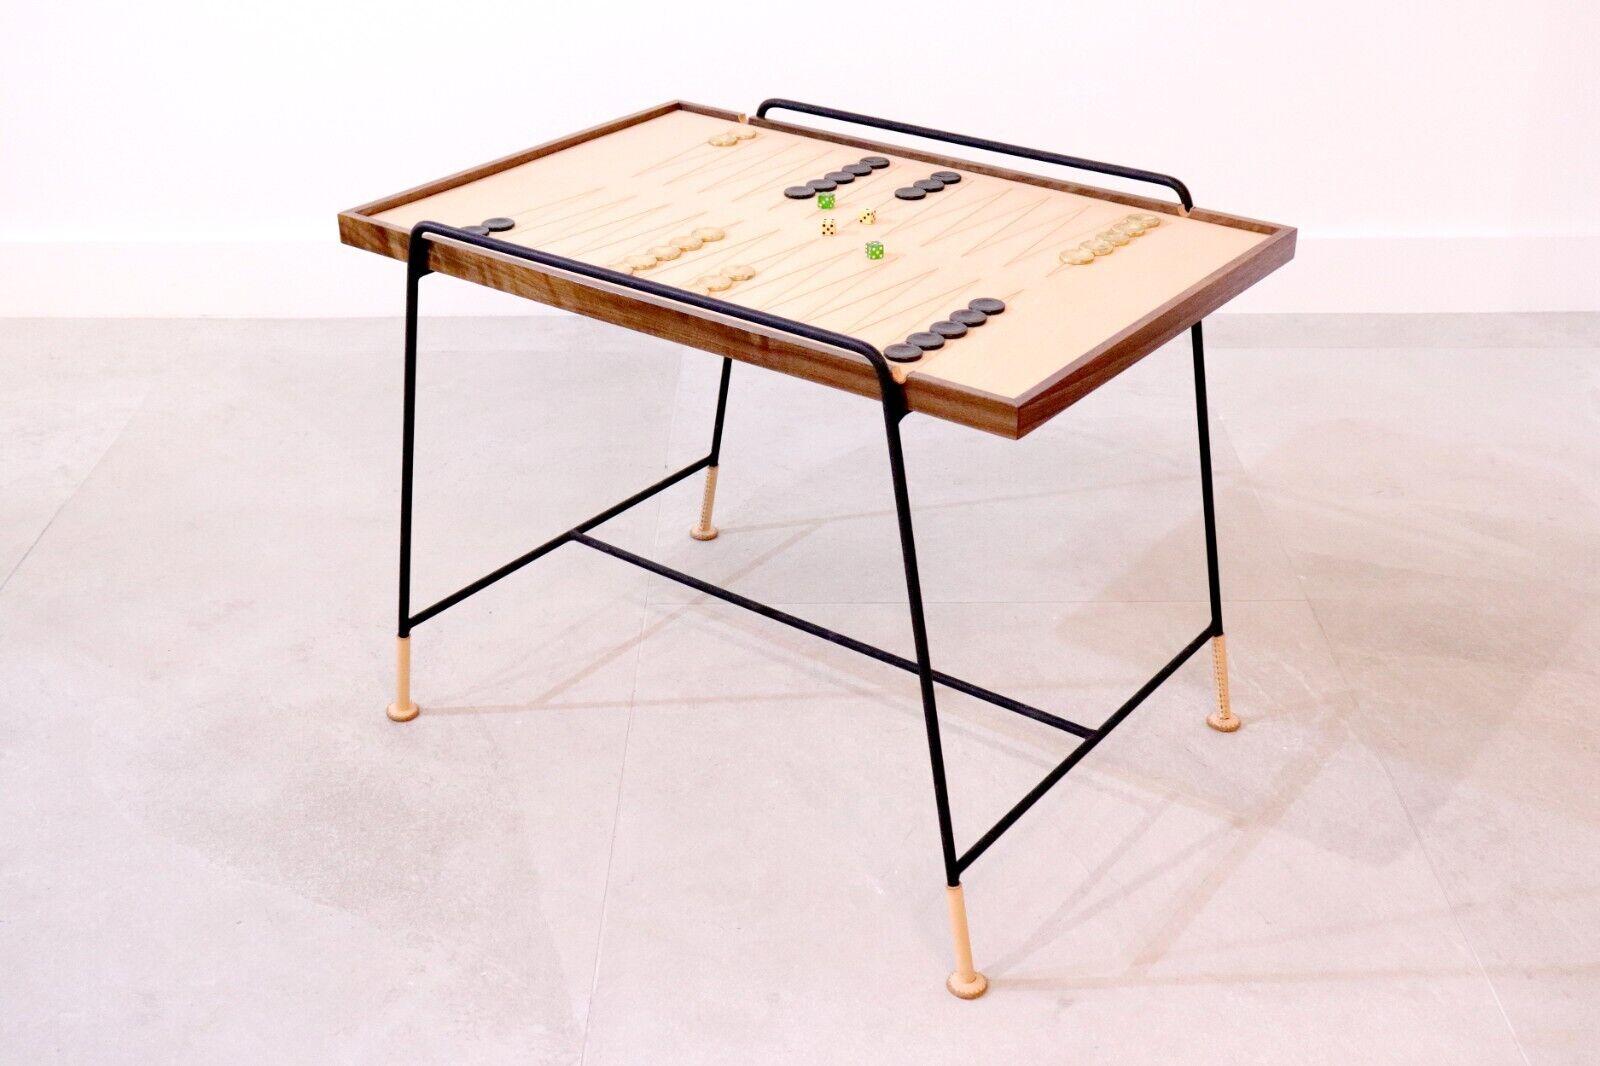 Made to order, these Games tables are of extremely high quality: bespoke made in England, the beautiful walnut and leather finish makes for a sophisticated games experience. reversible top allows for use as a regular table or backgammon board. The